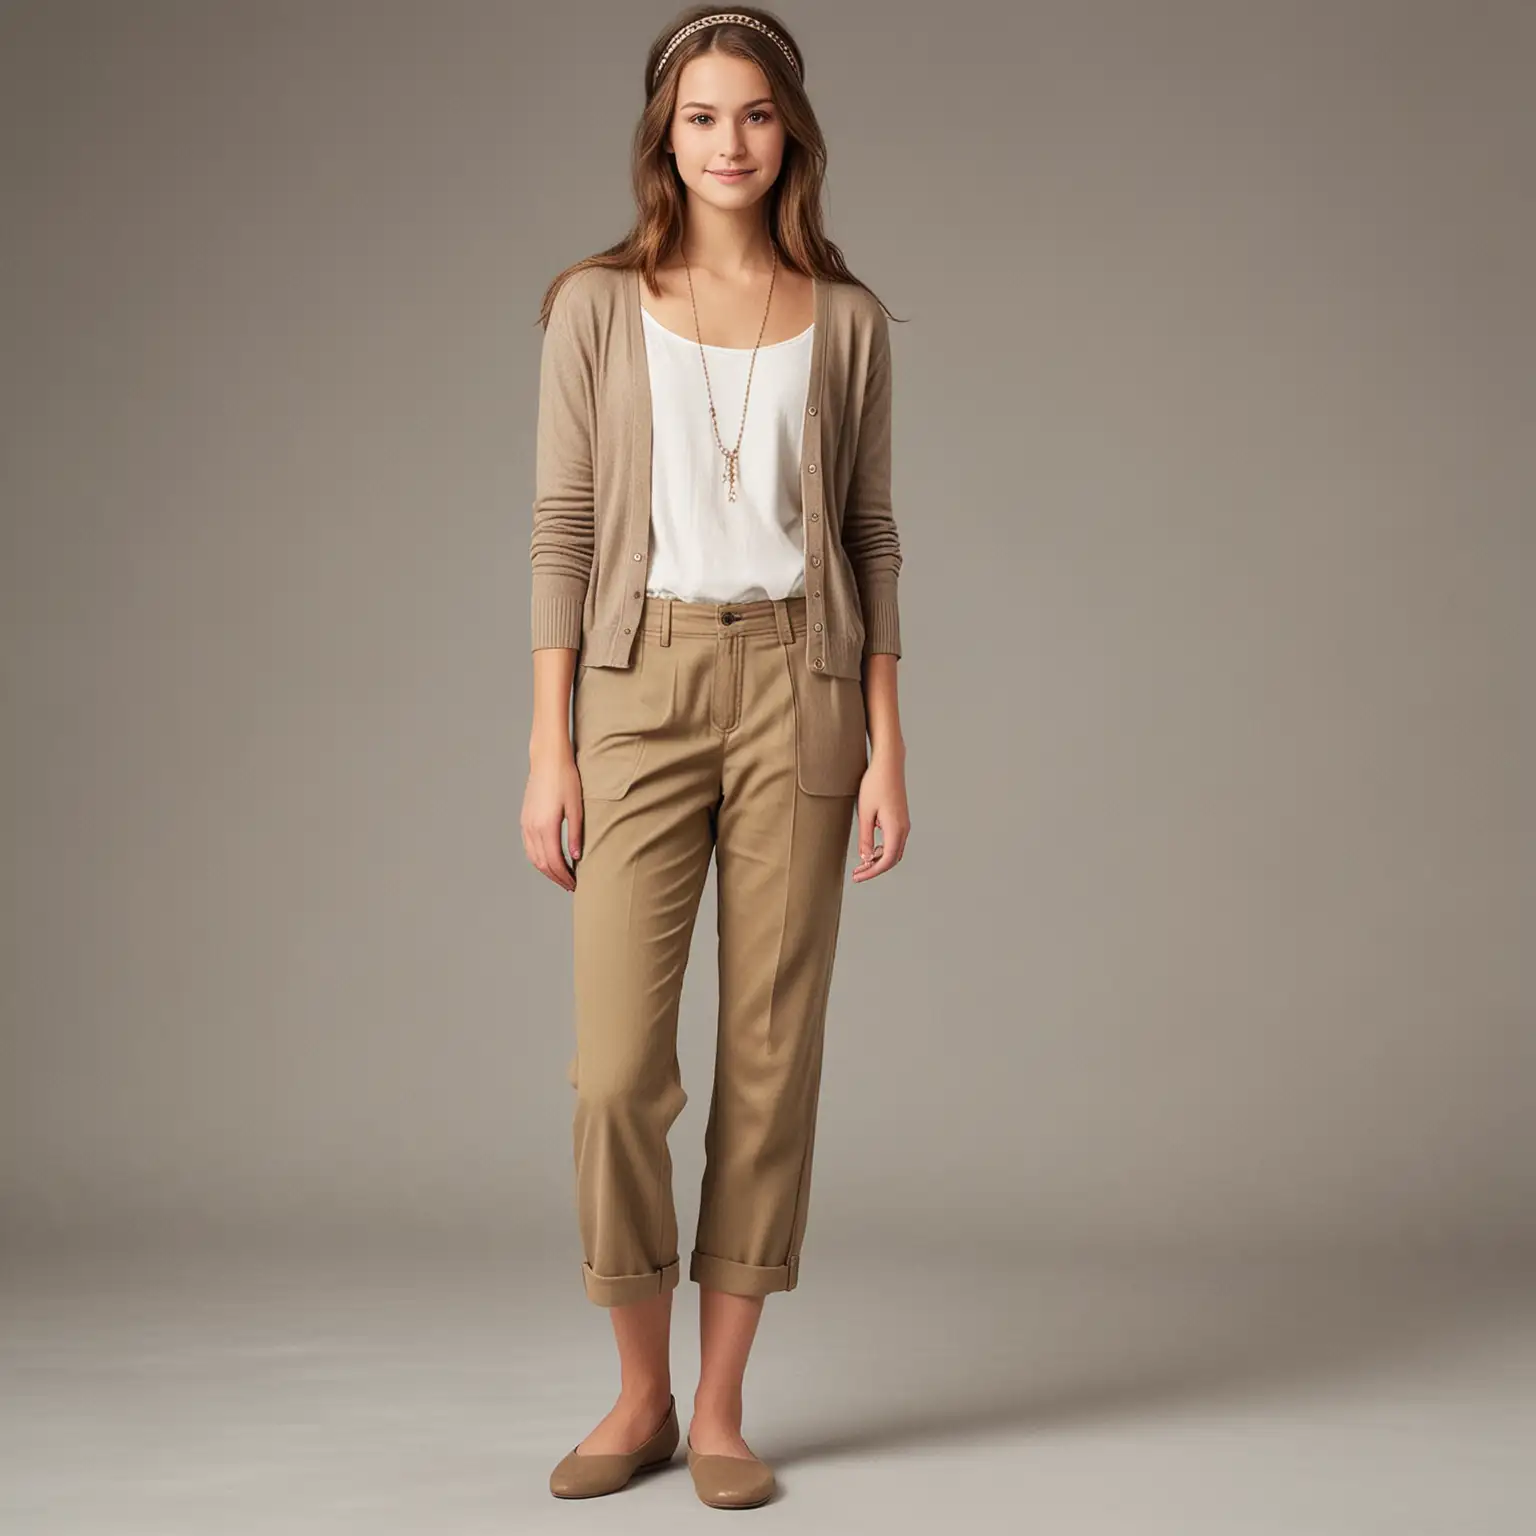 Character: A teenage Caucasian girl, about average height.
Appearance: She has brown hair styled neatly with a headband. She is wearing minimal makeup and a single strand necklace as her only piece of jewelry.
Clothing: She is dressed in wide leg khaki pants paired with a blouse and a cardigan.
Shoes: She is wearing ballet flats. show the full person head to toe